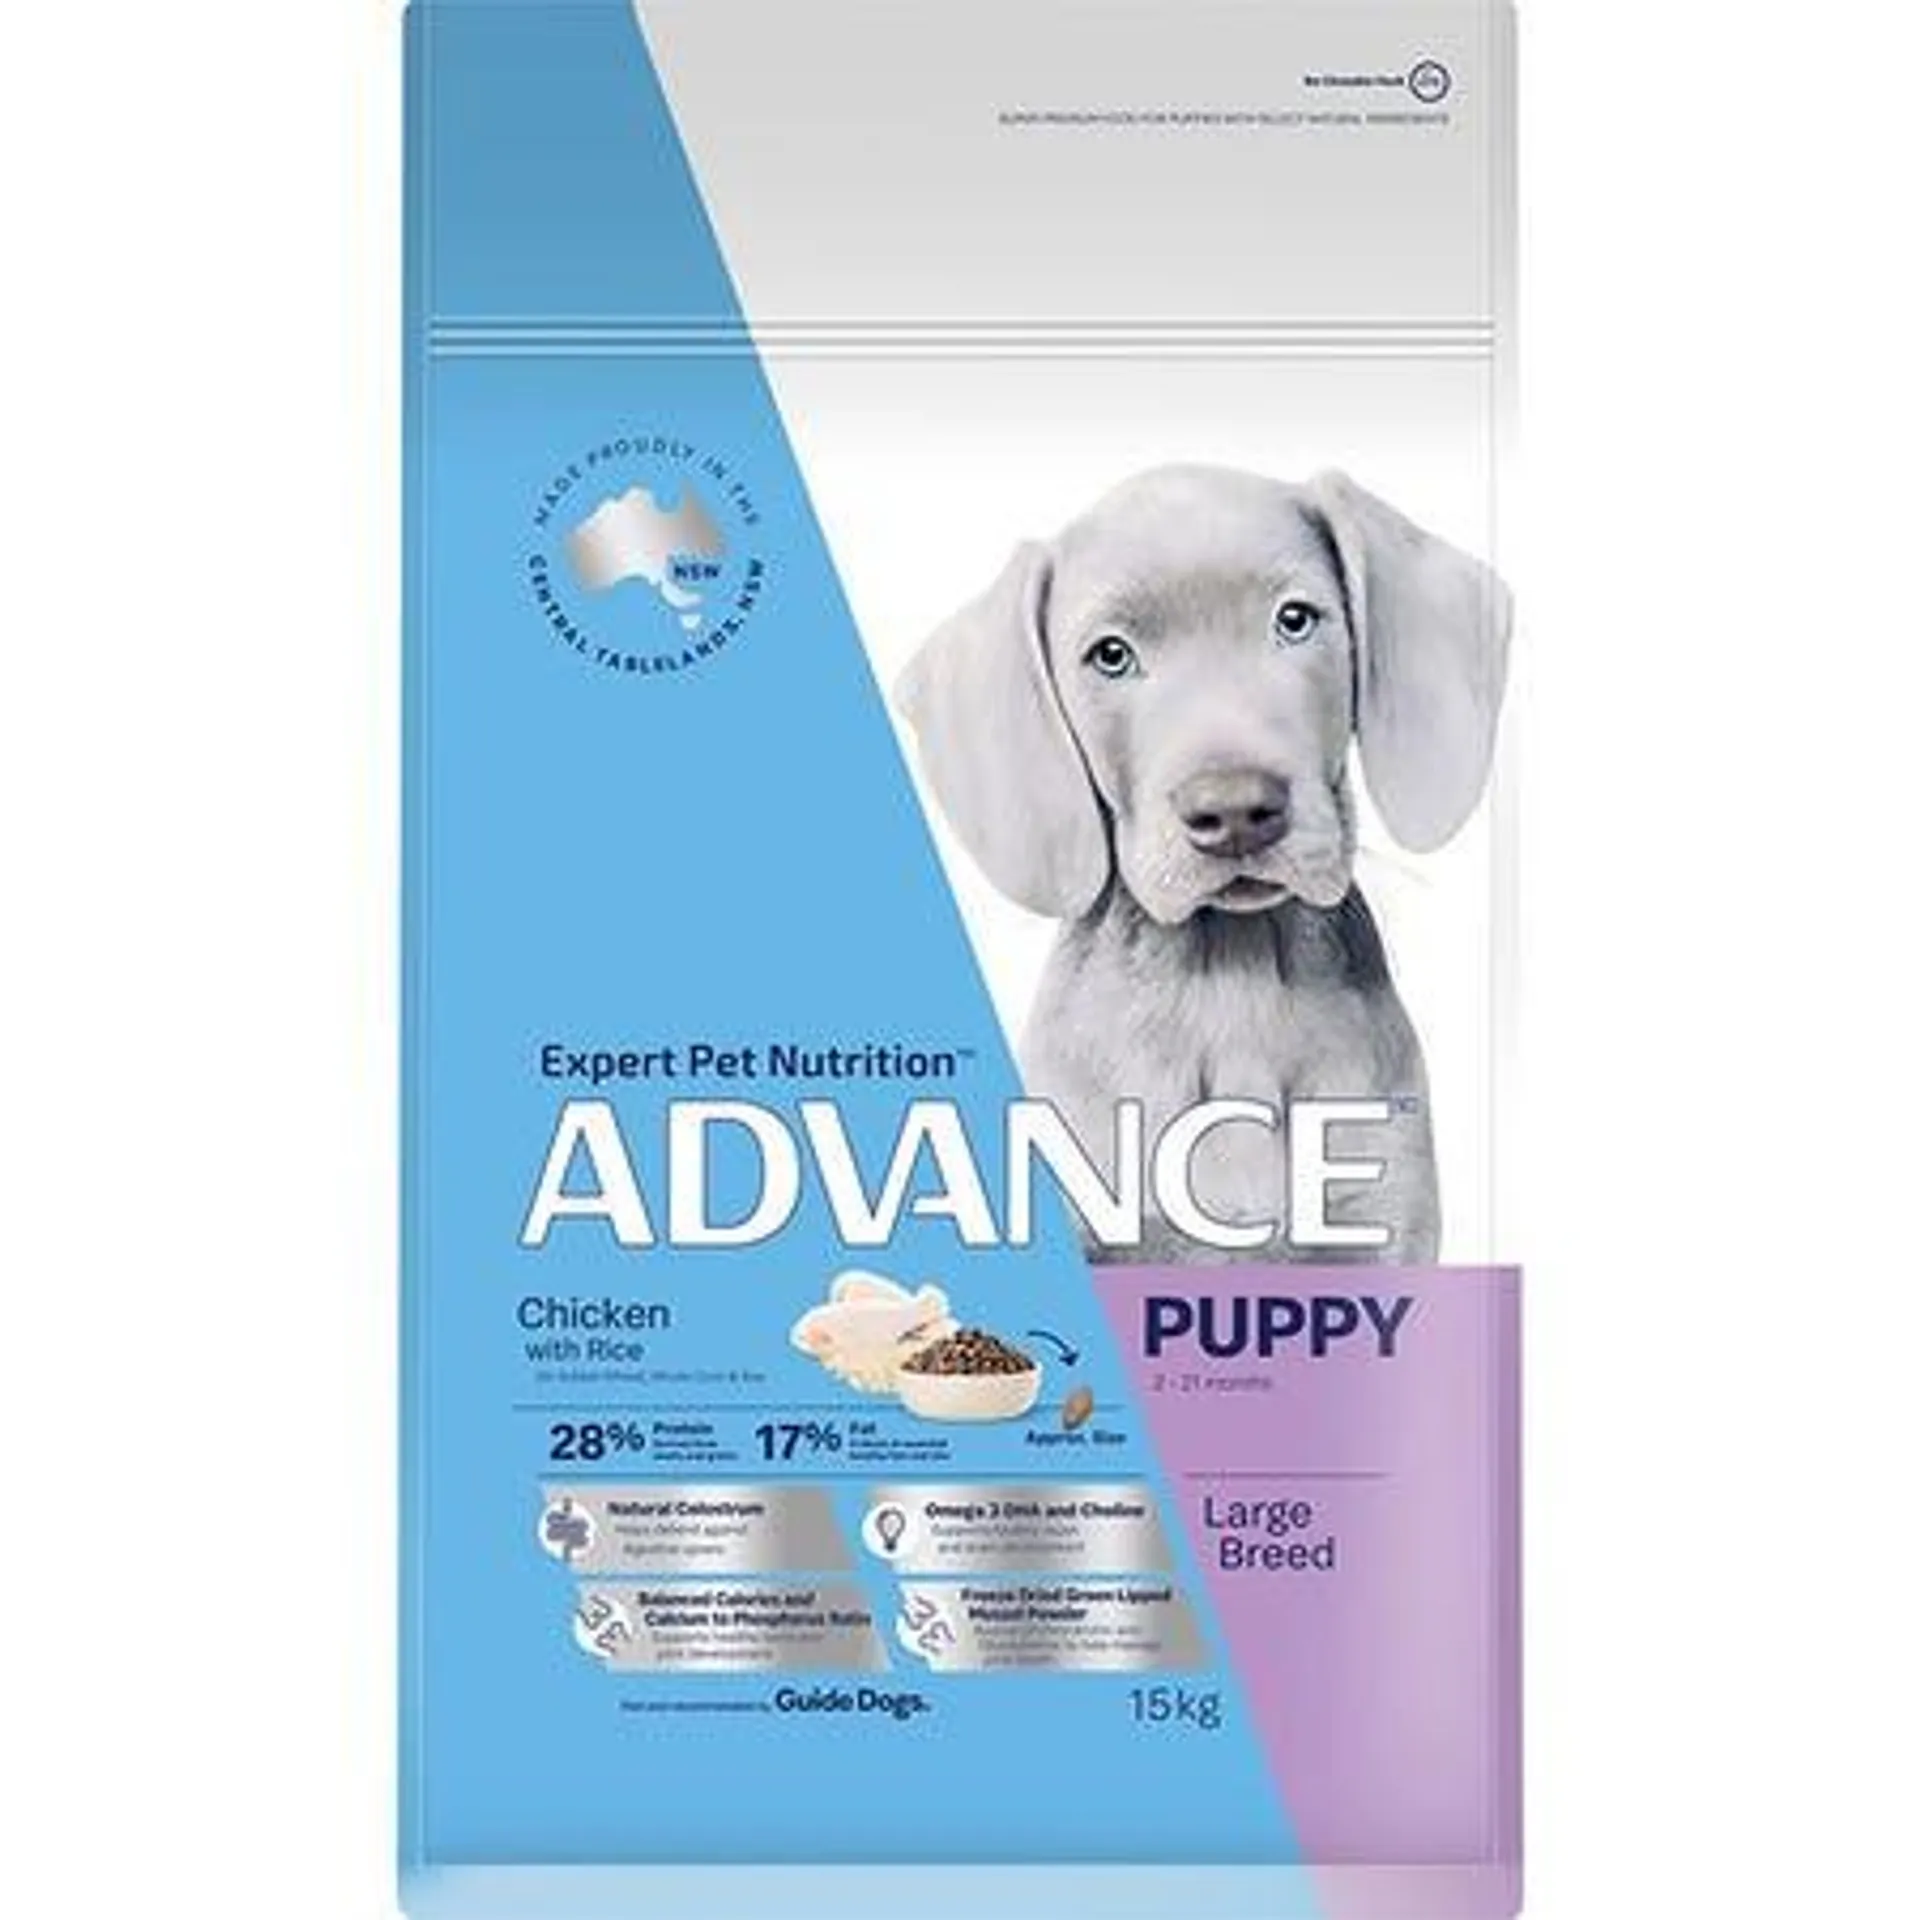 ADVANCE Puppy Large Breed Dry Dog Food Chicken with Rice